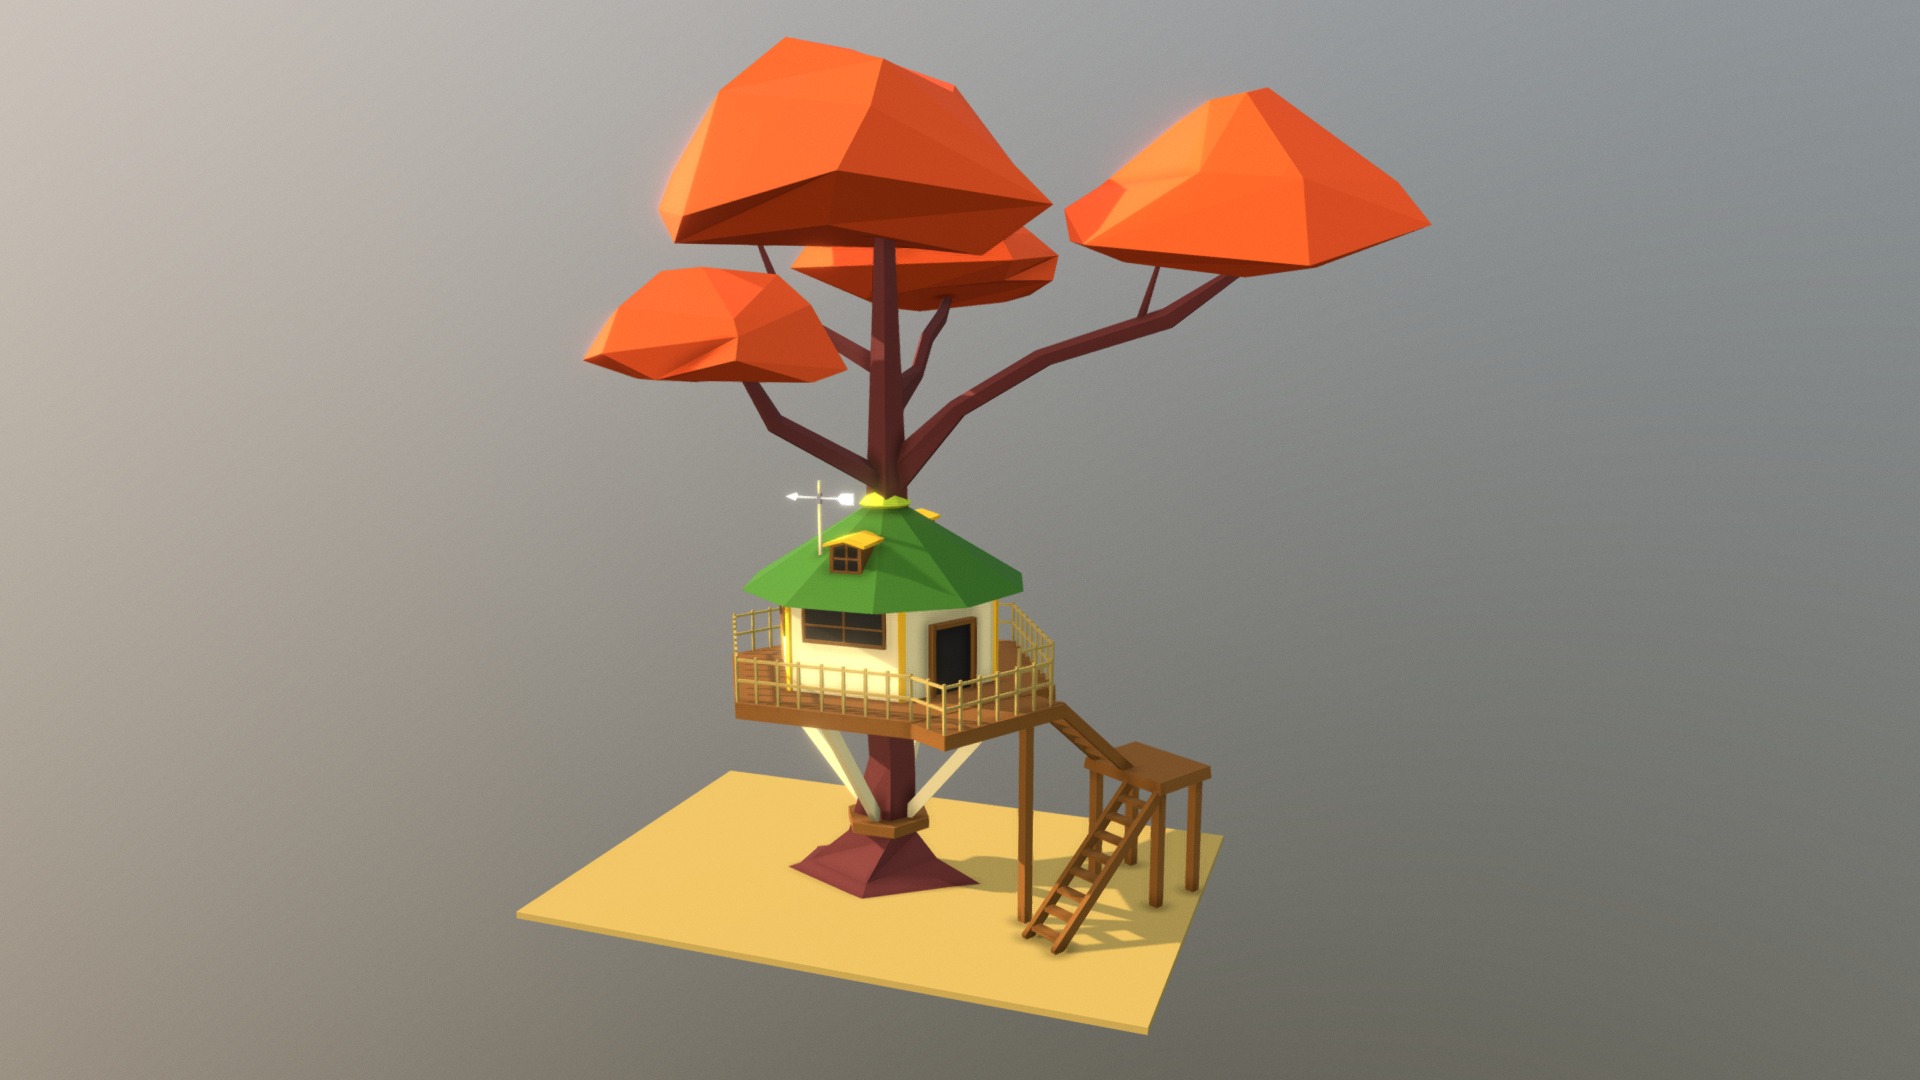 3D model HIE Tree House N3 - This is a 3D model of the HIE Tree House N3. The 3D model is about a small house with a small umbrella.